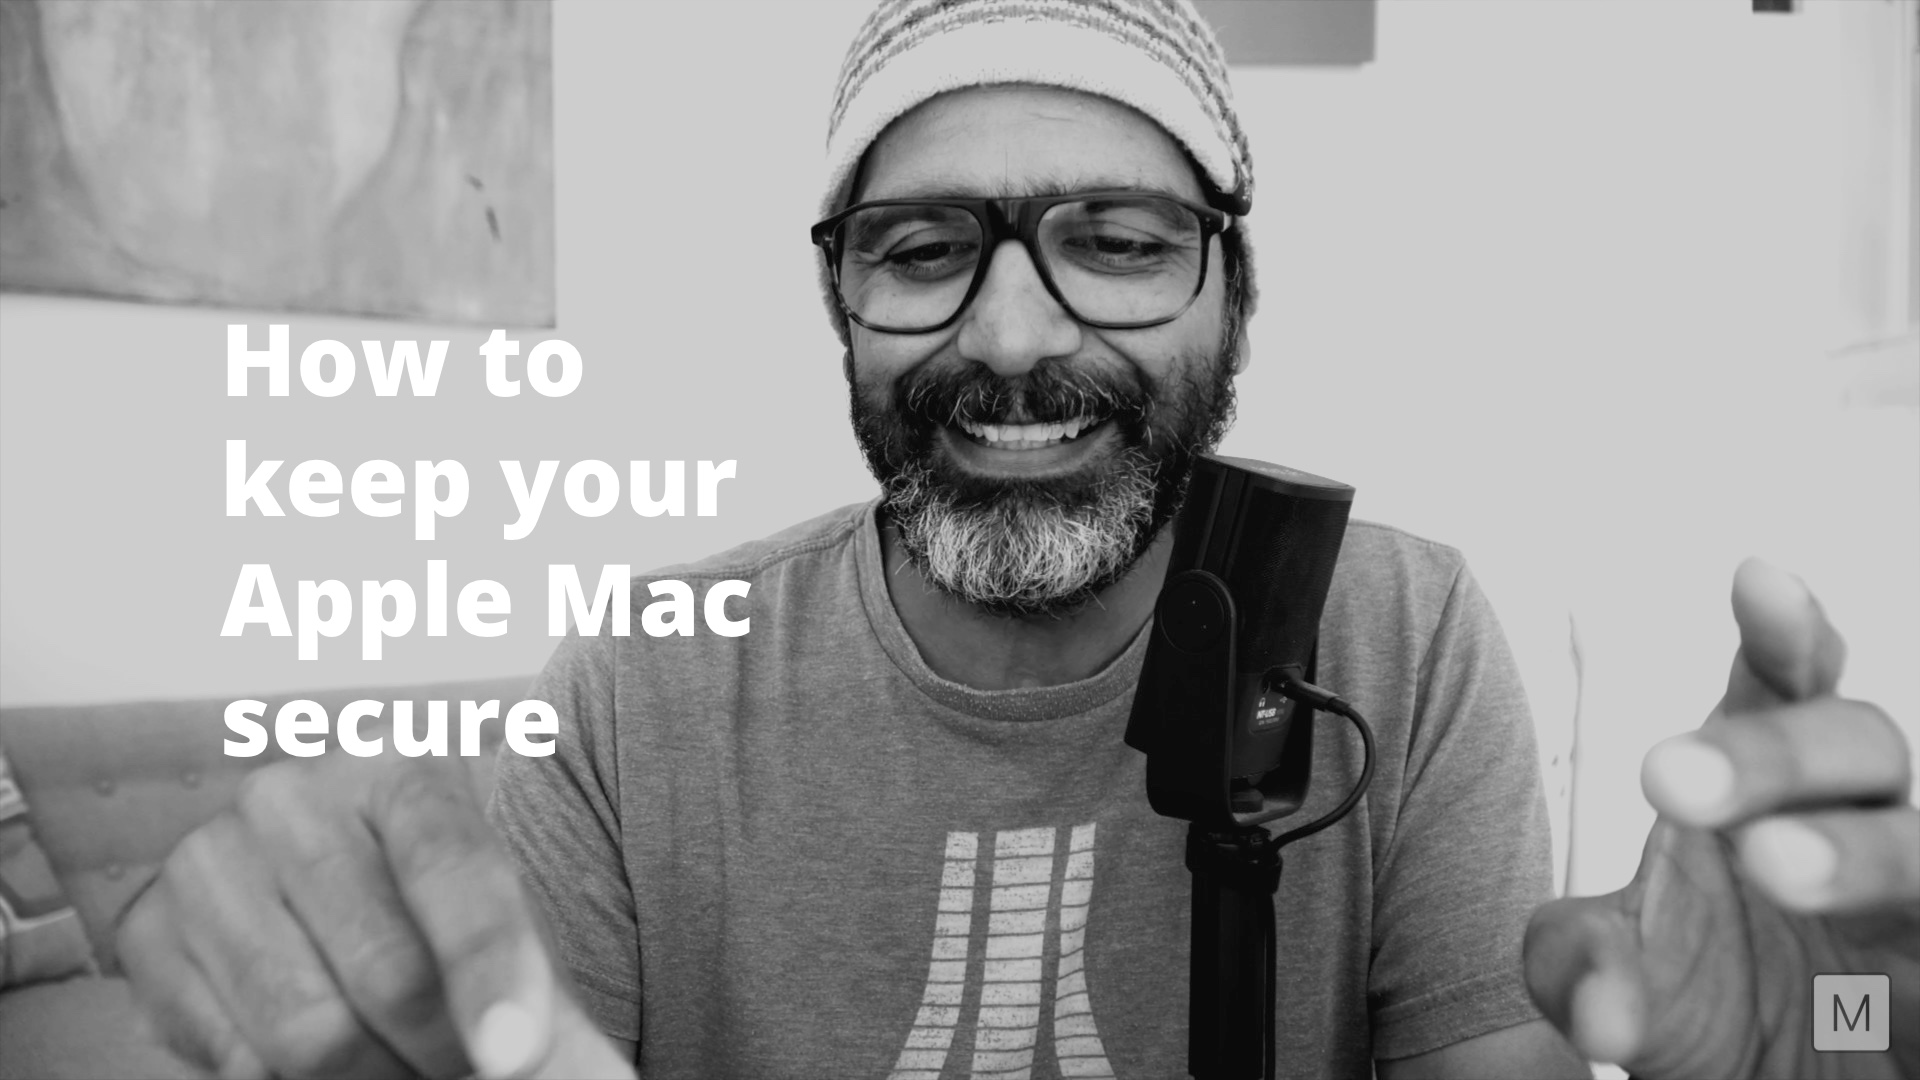 How to keep your Apple Mac secure